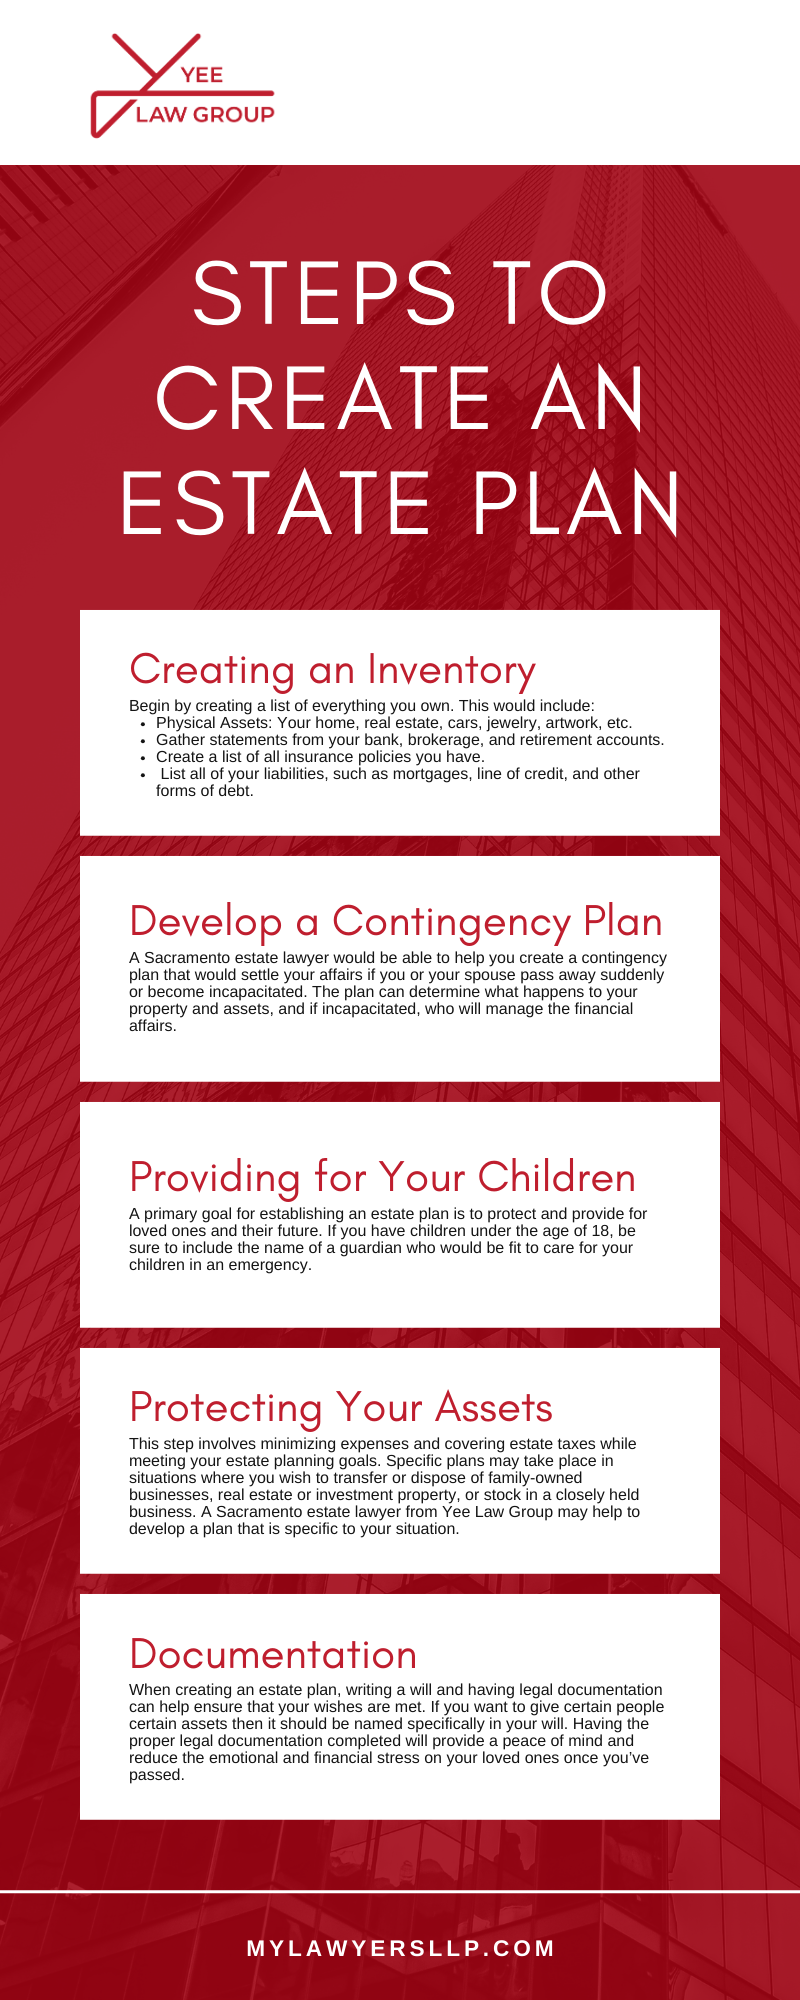 Steps To Create An Estate Plan Infographic